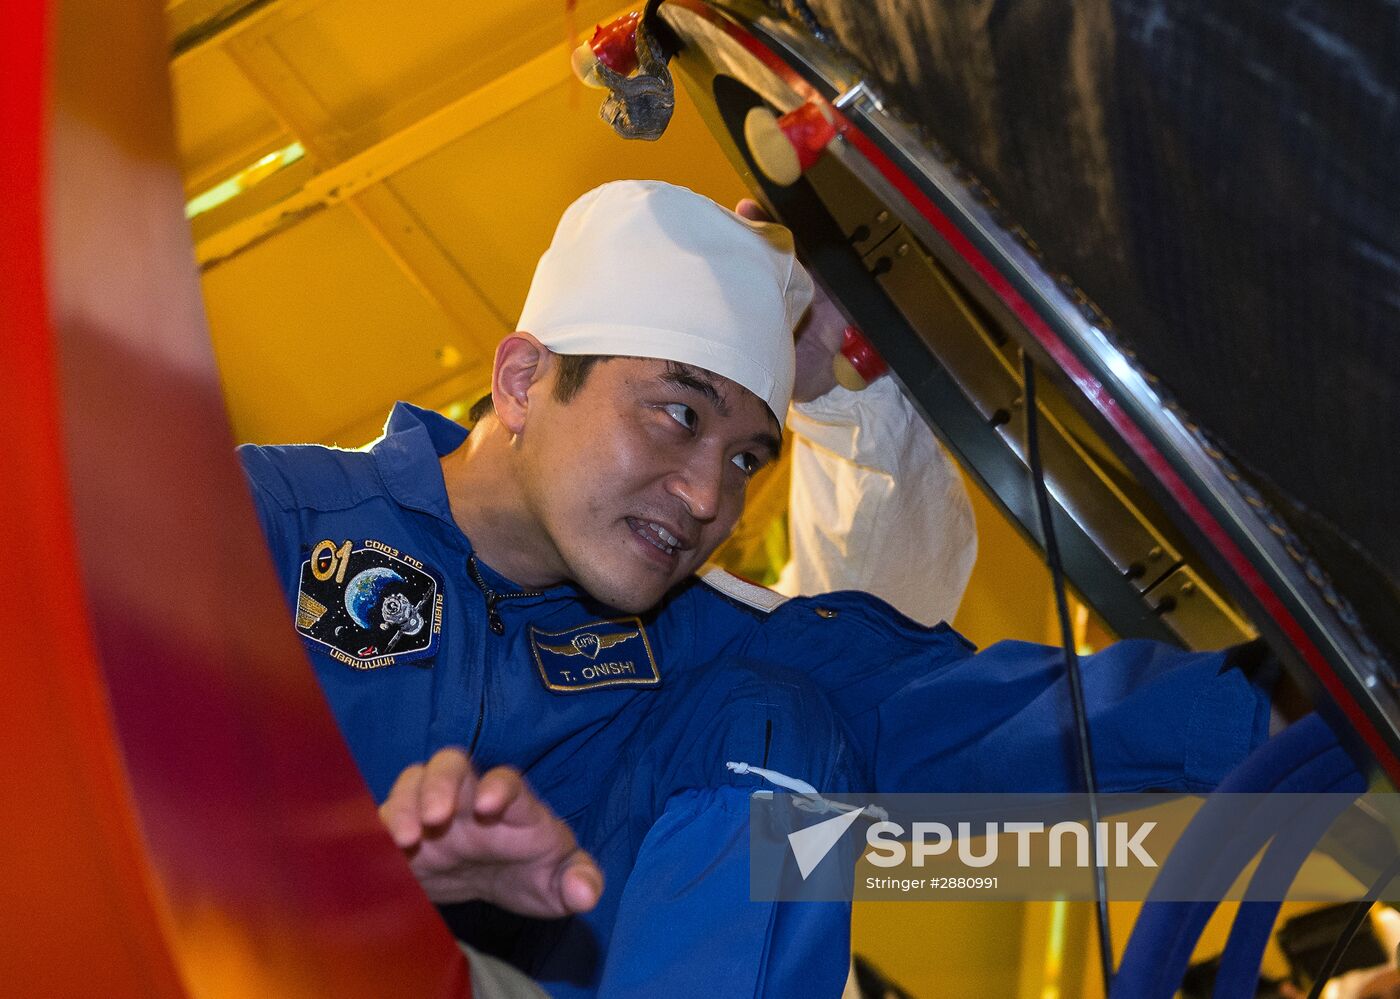 Preparations for ISS Expedition 48/49 launch